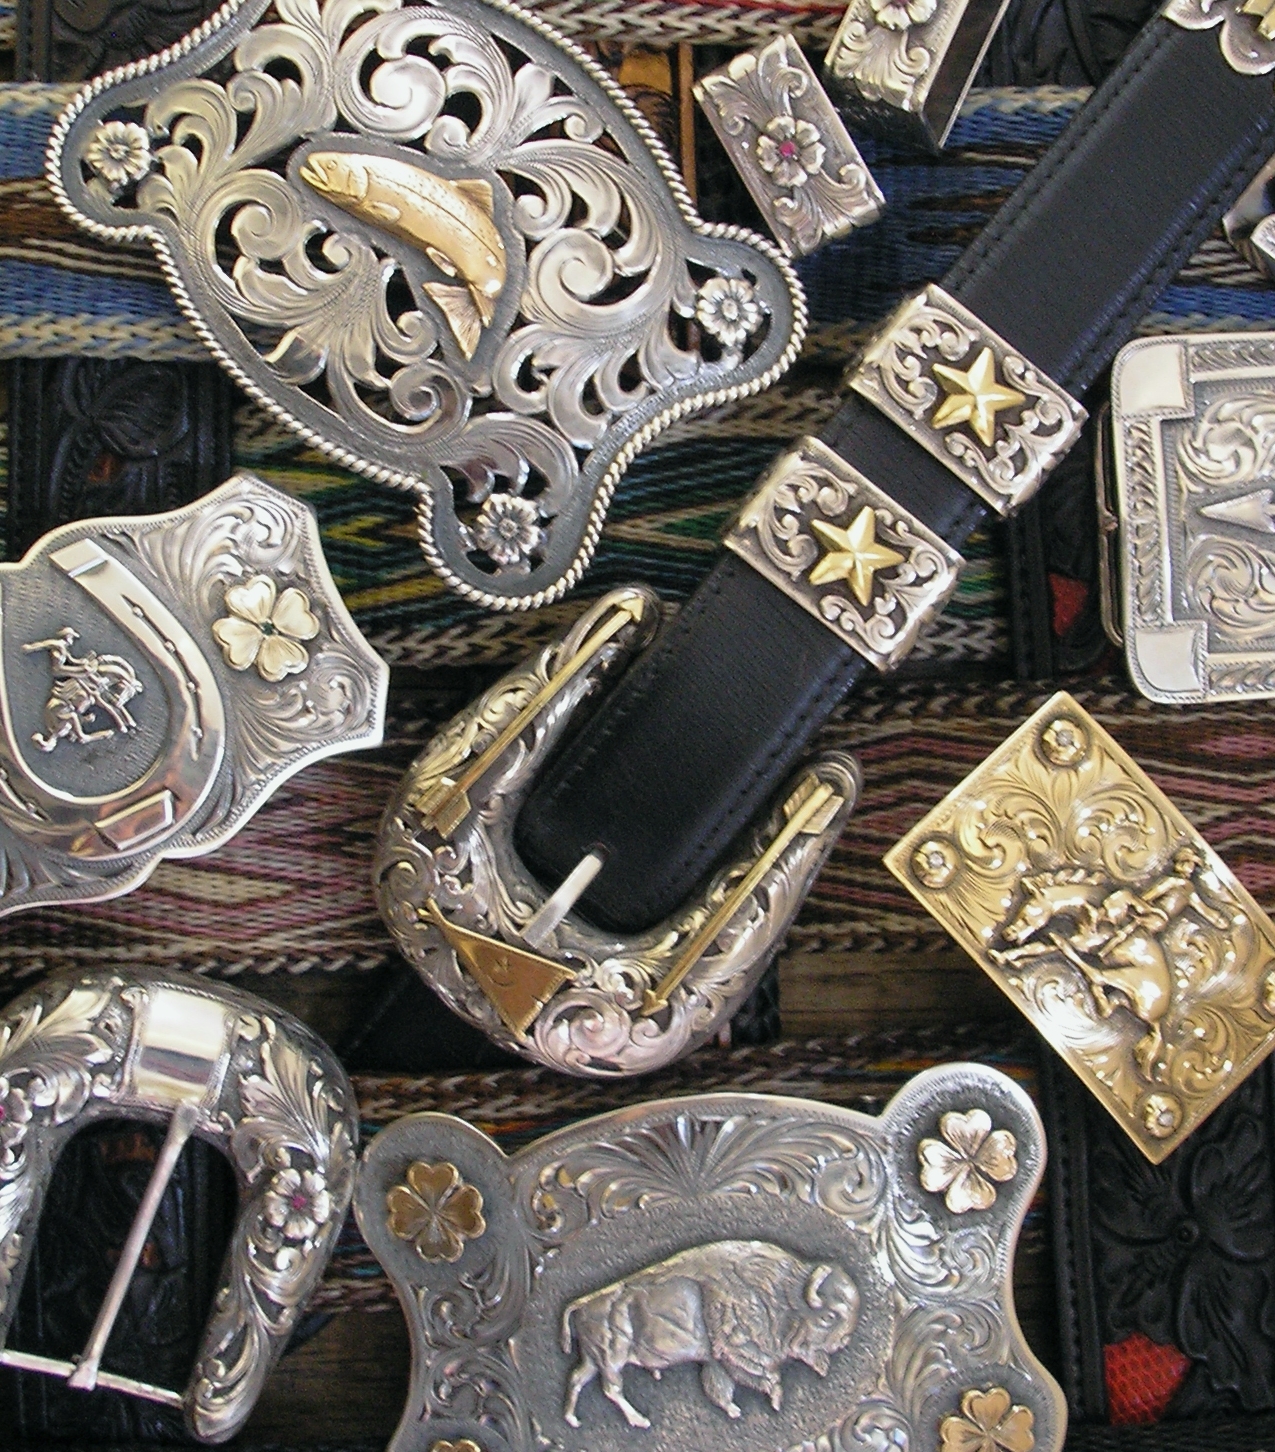 Intricate Western accessories such as these belt buckles by Cayuse Western Americana will be featured at the Jackson, Wyo., Western Design Conference.